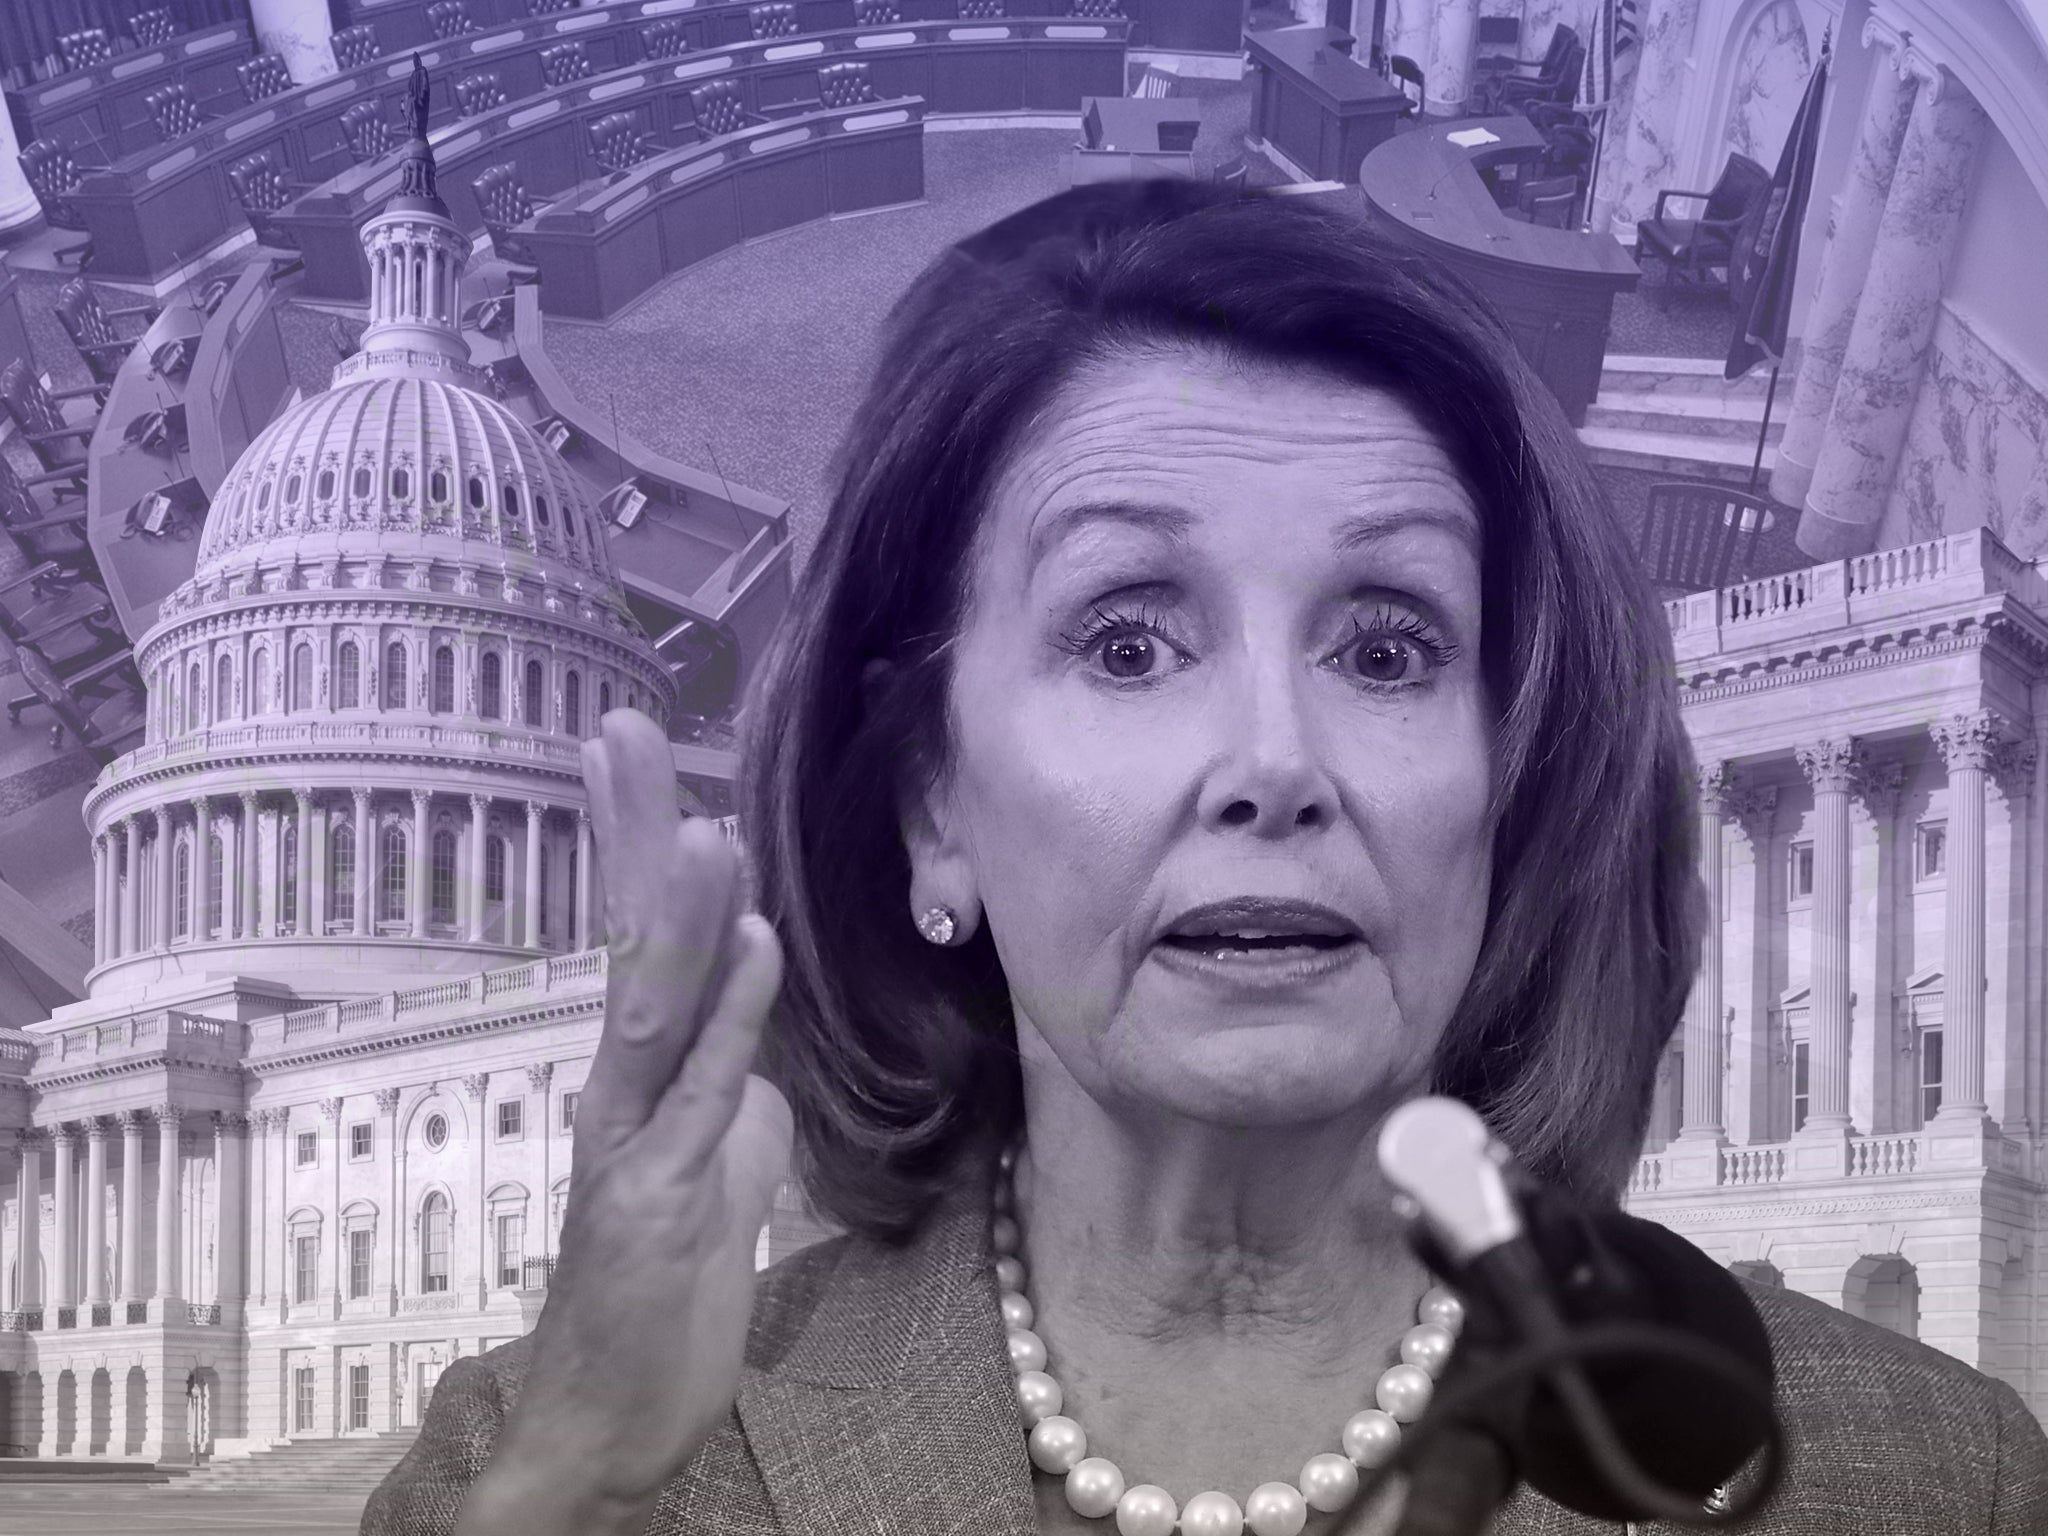 Nancy Pelosi has stepped down as Democrat leader after their defeat in the House of Representatives midterm elections